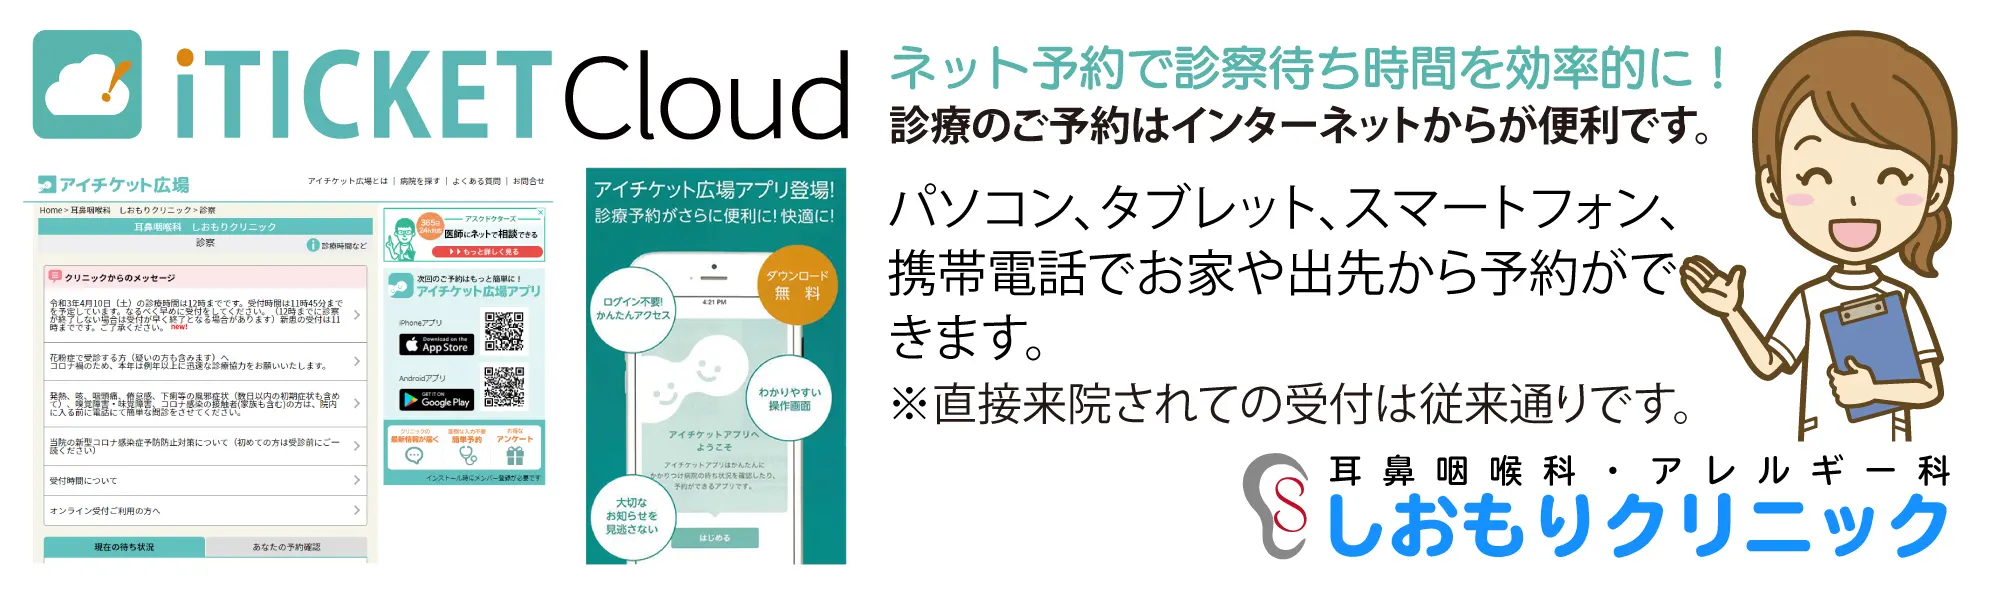 iTICKET Cloud